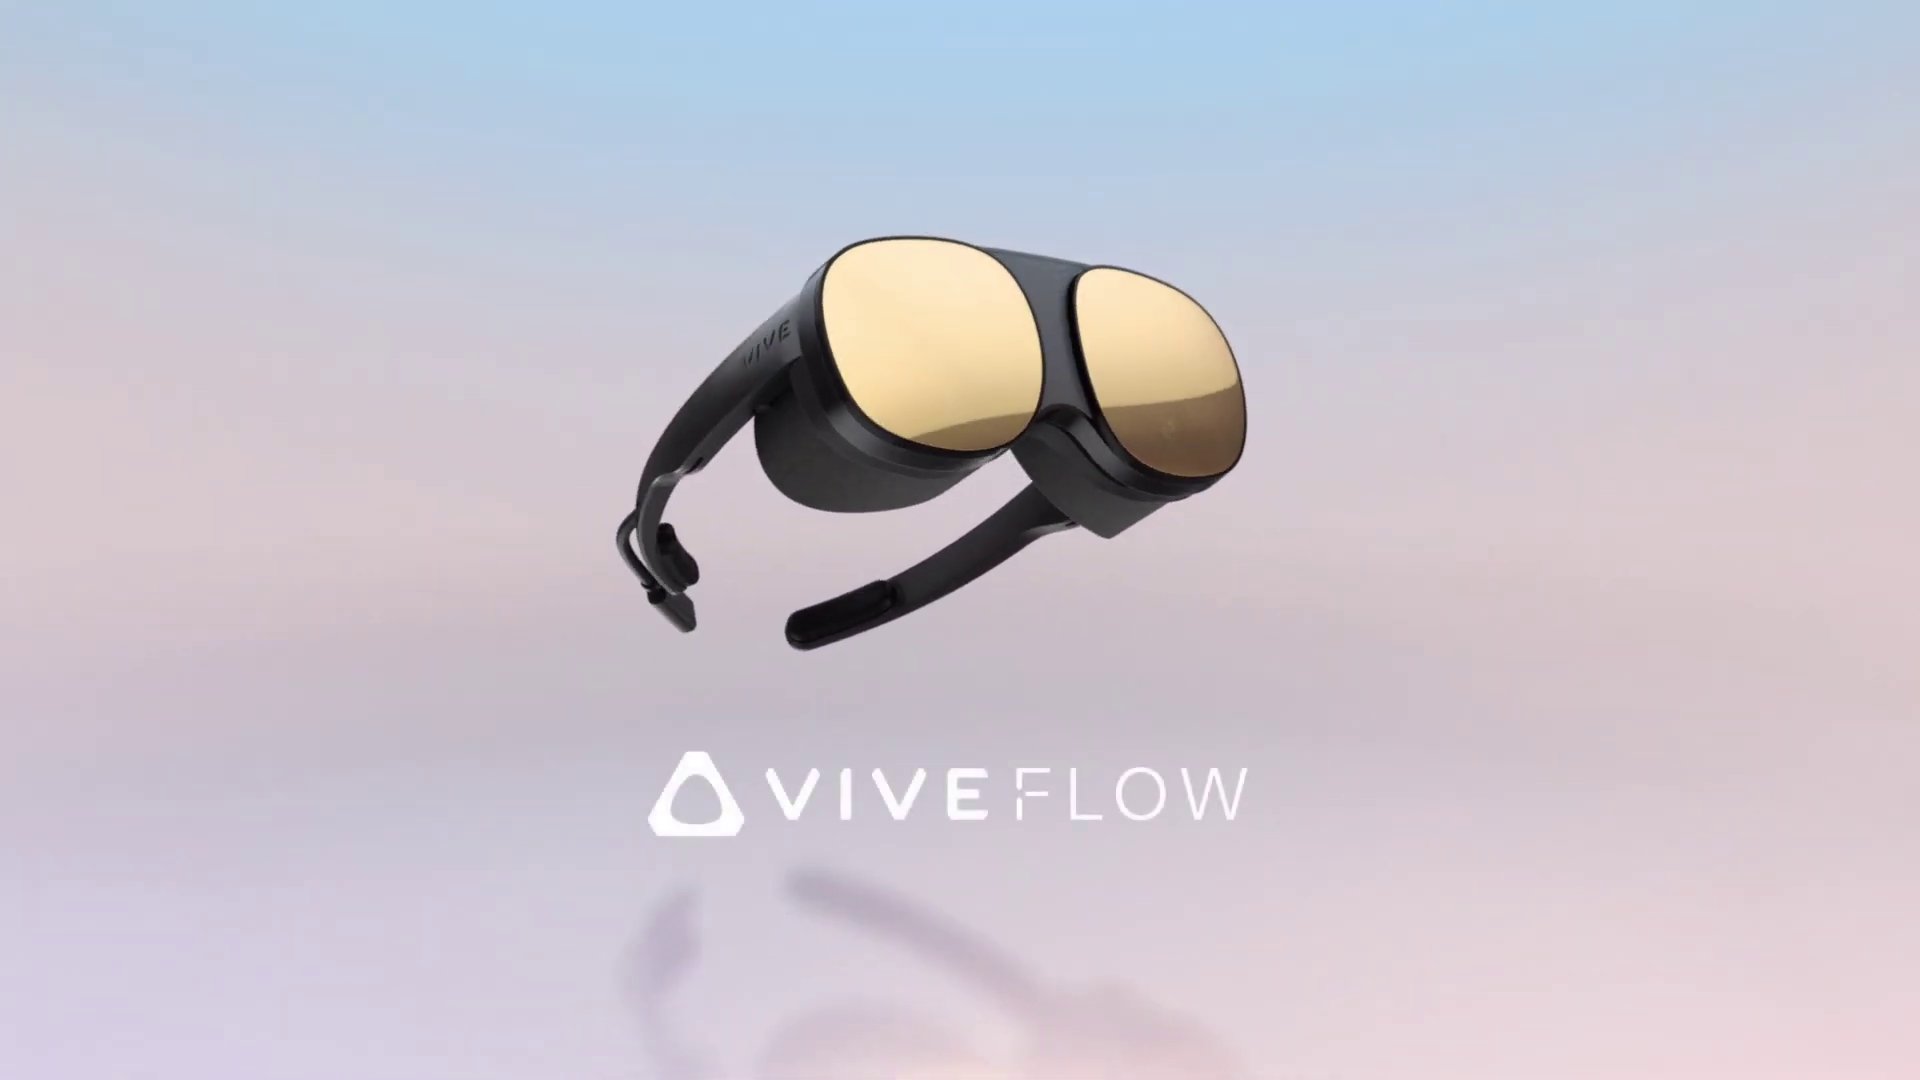 HTC Vive Flow Leaks, and It's the Weirdest VR Headset Yet